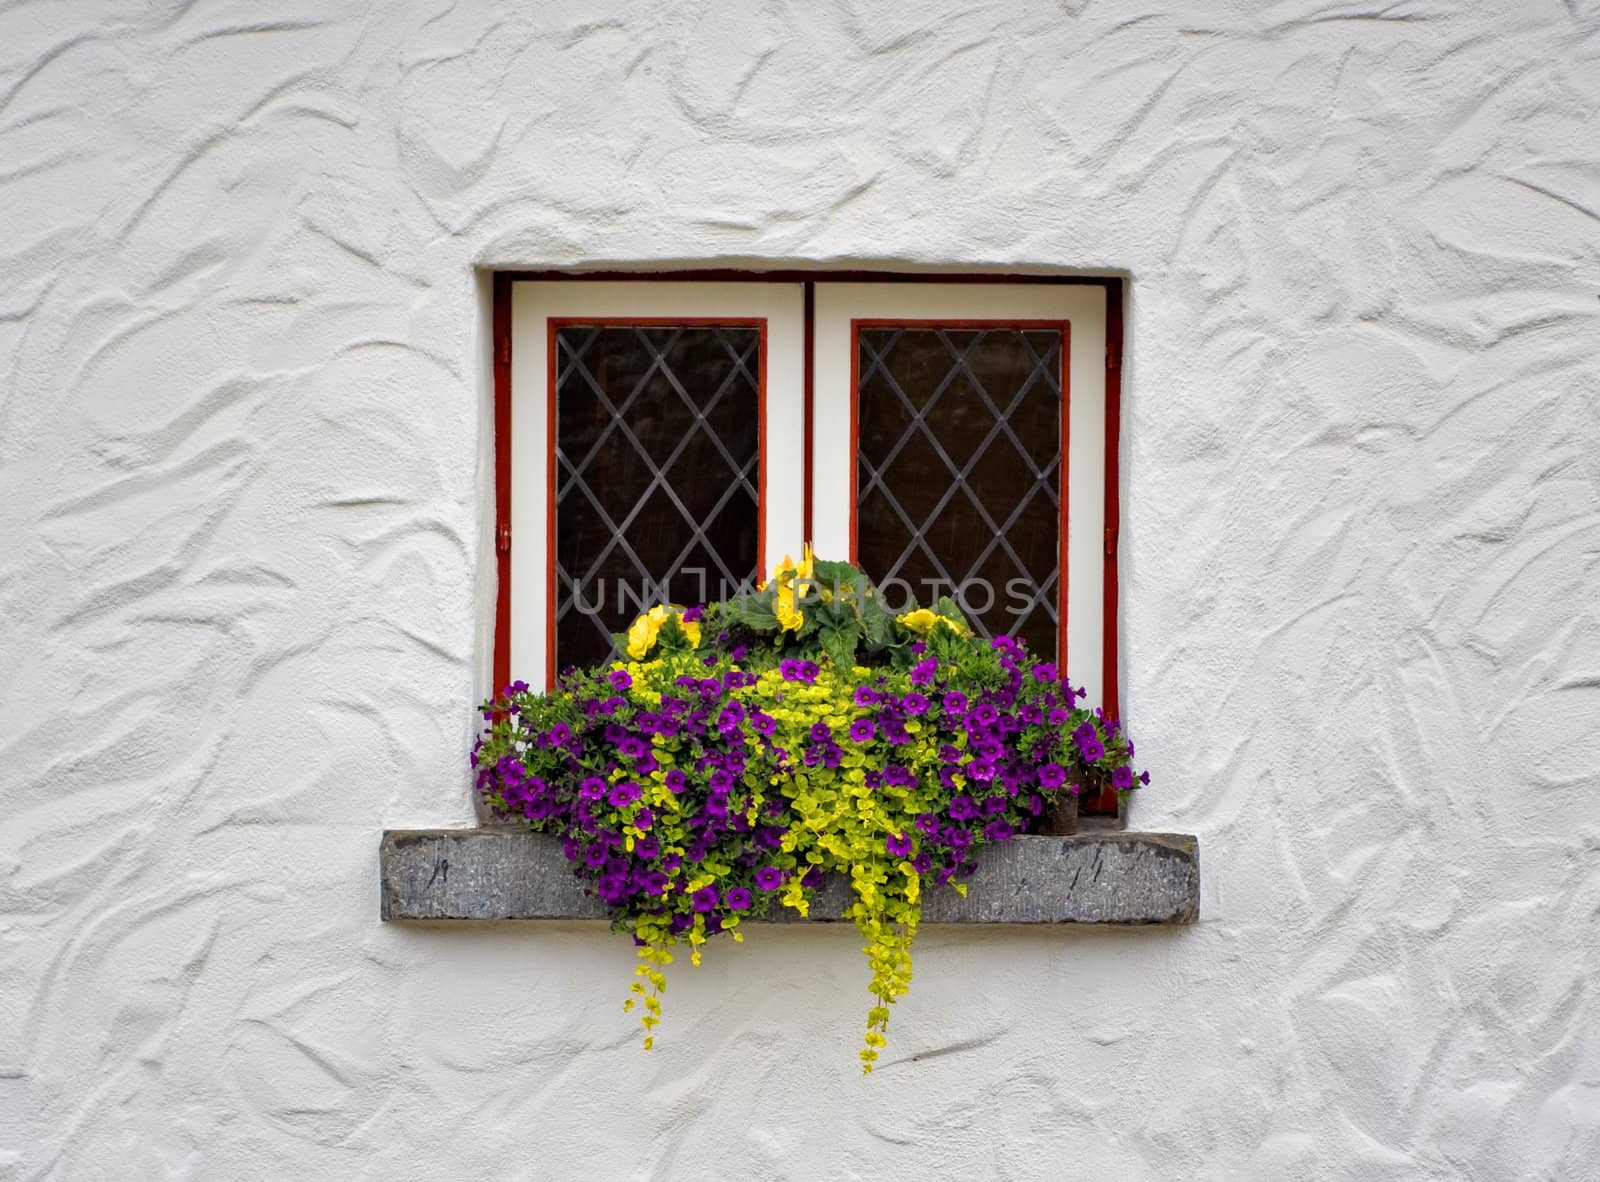 Flowers on the window sill of a white building